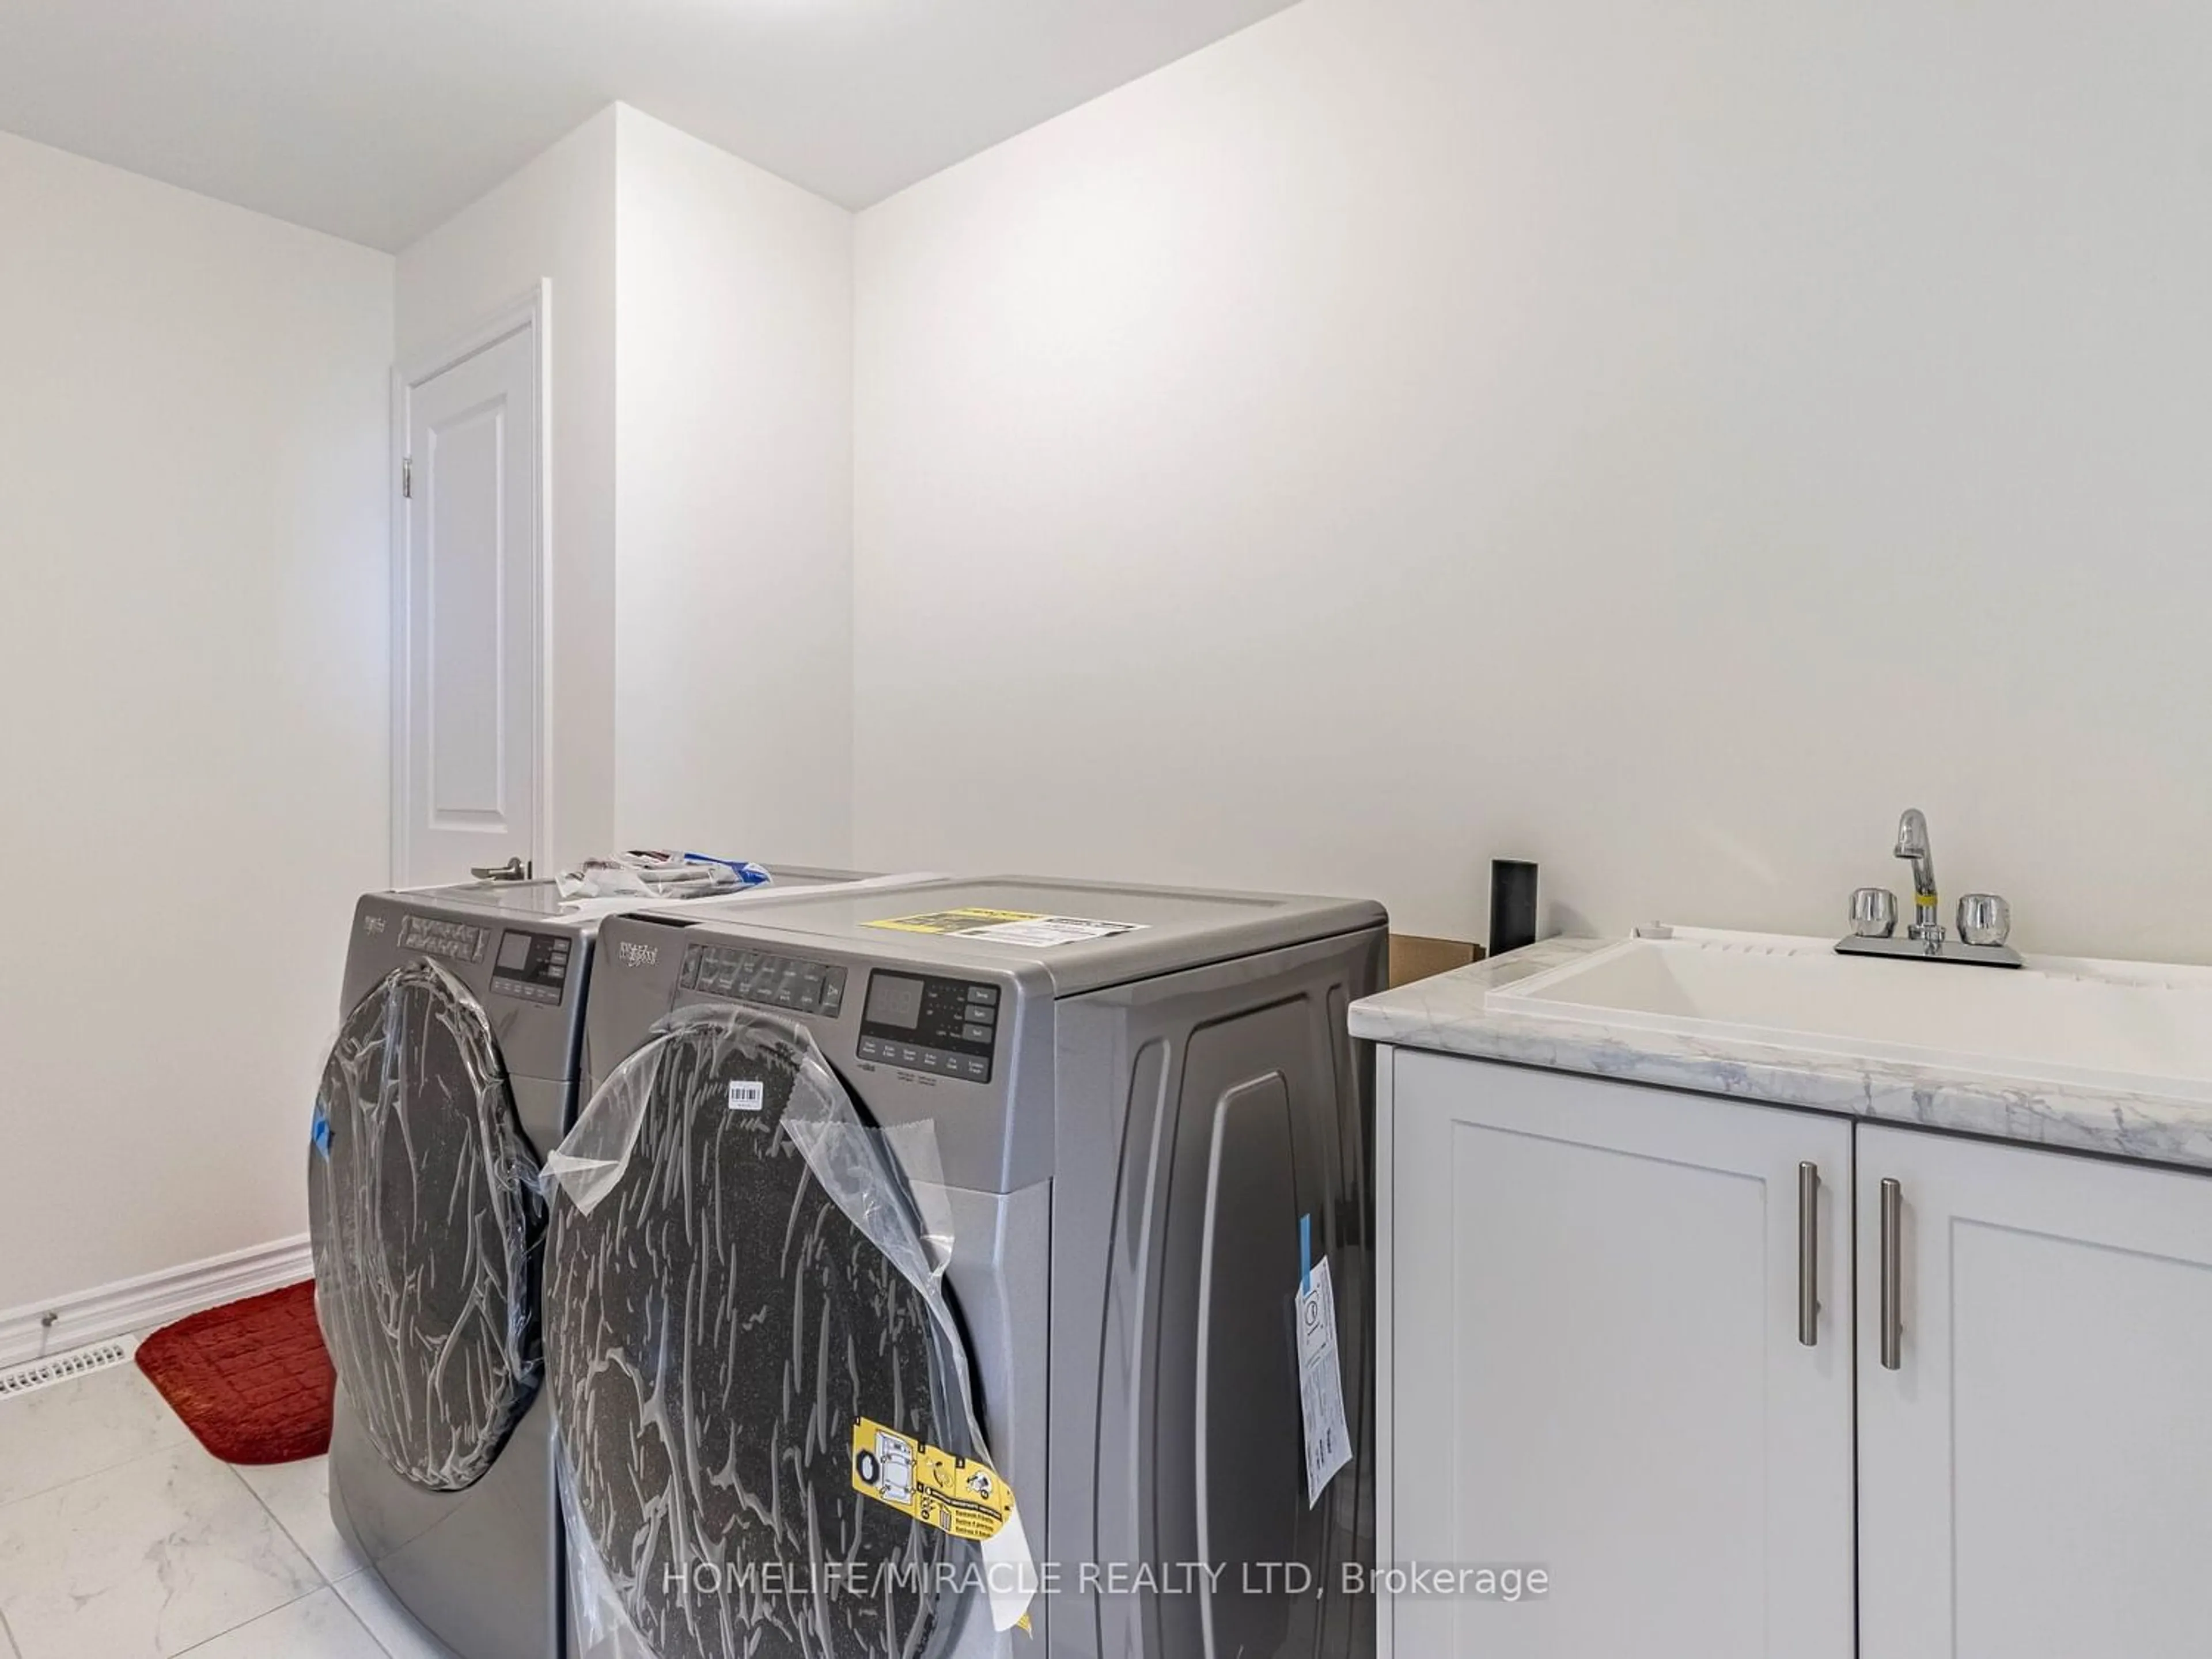 Laundry room for 12354 Mclaughlin Rd, Caledon Ontario L7C 4L7